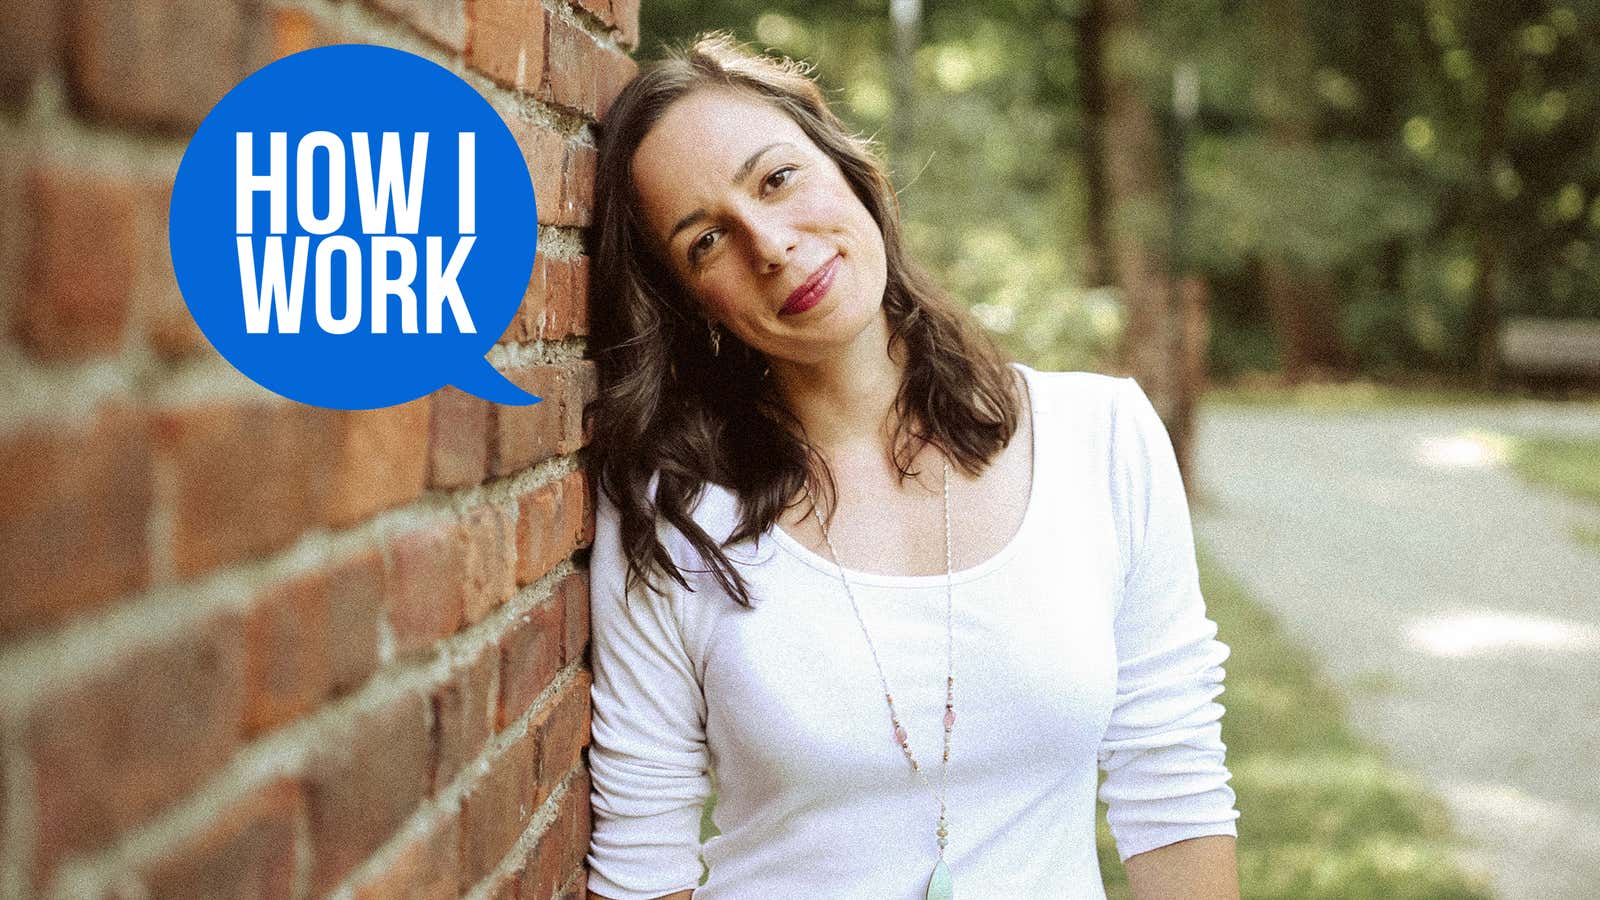 I'm Melinda Wenner Moyer, Author of 'How to Raise Kids Who Aren't Assholes', and This Is How I Work